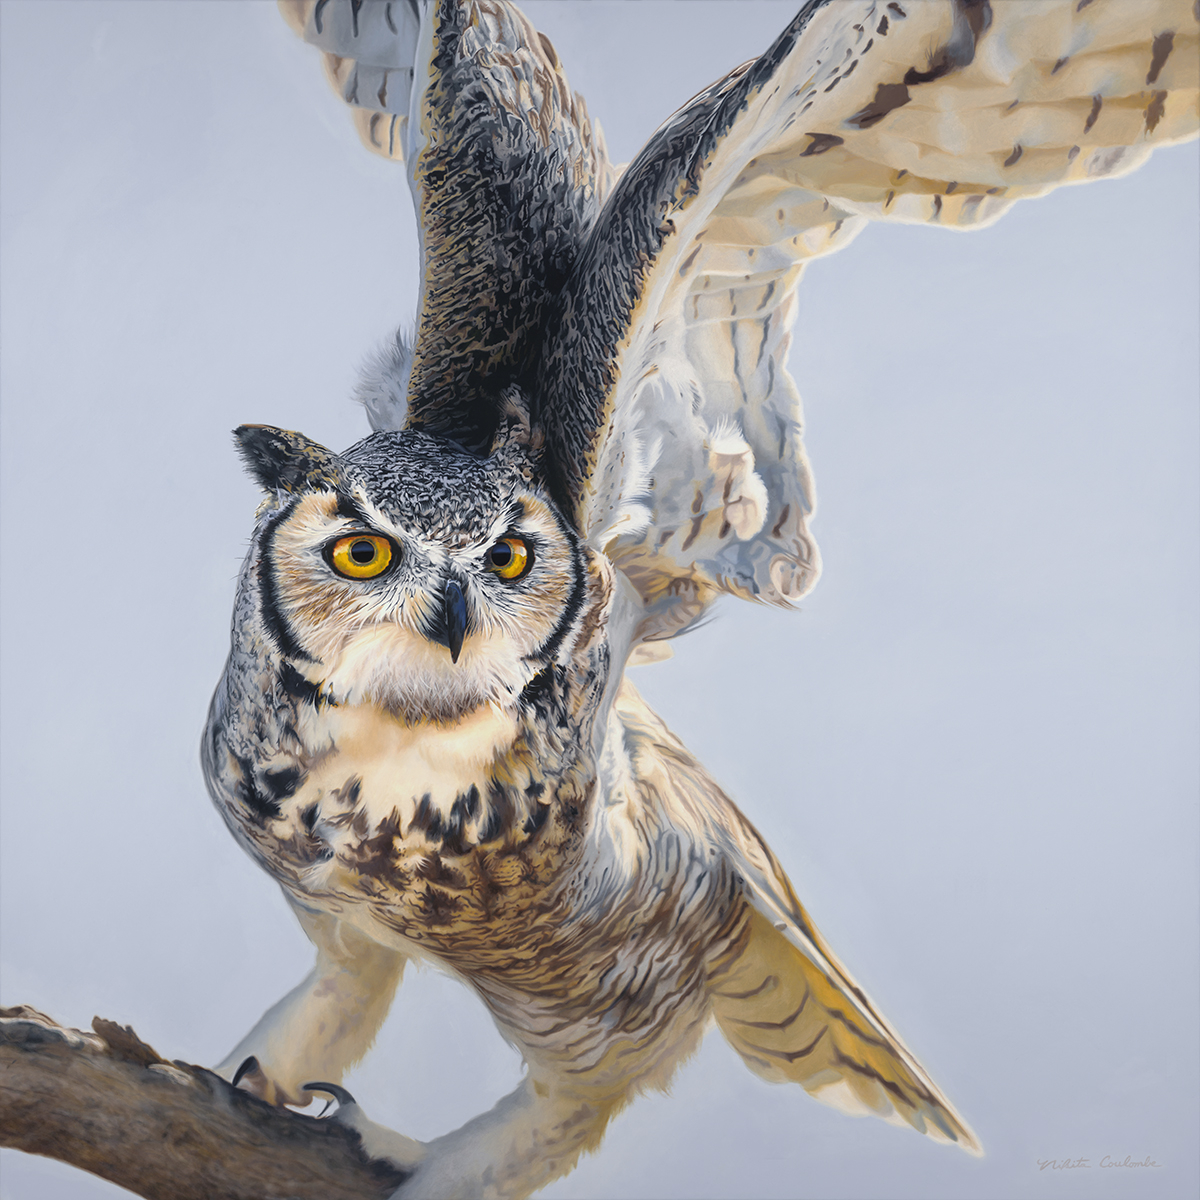 Your Time Will Come (Great Horned Owl)